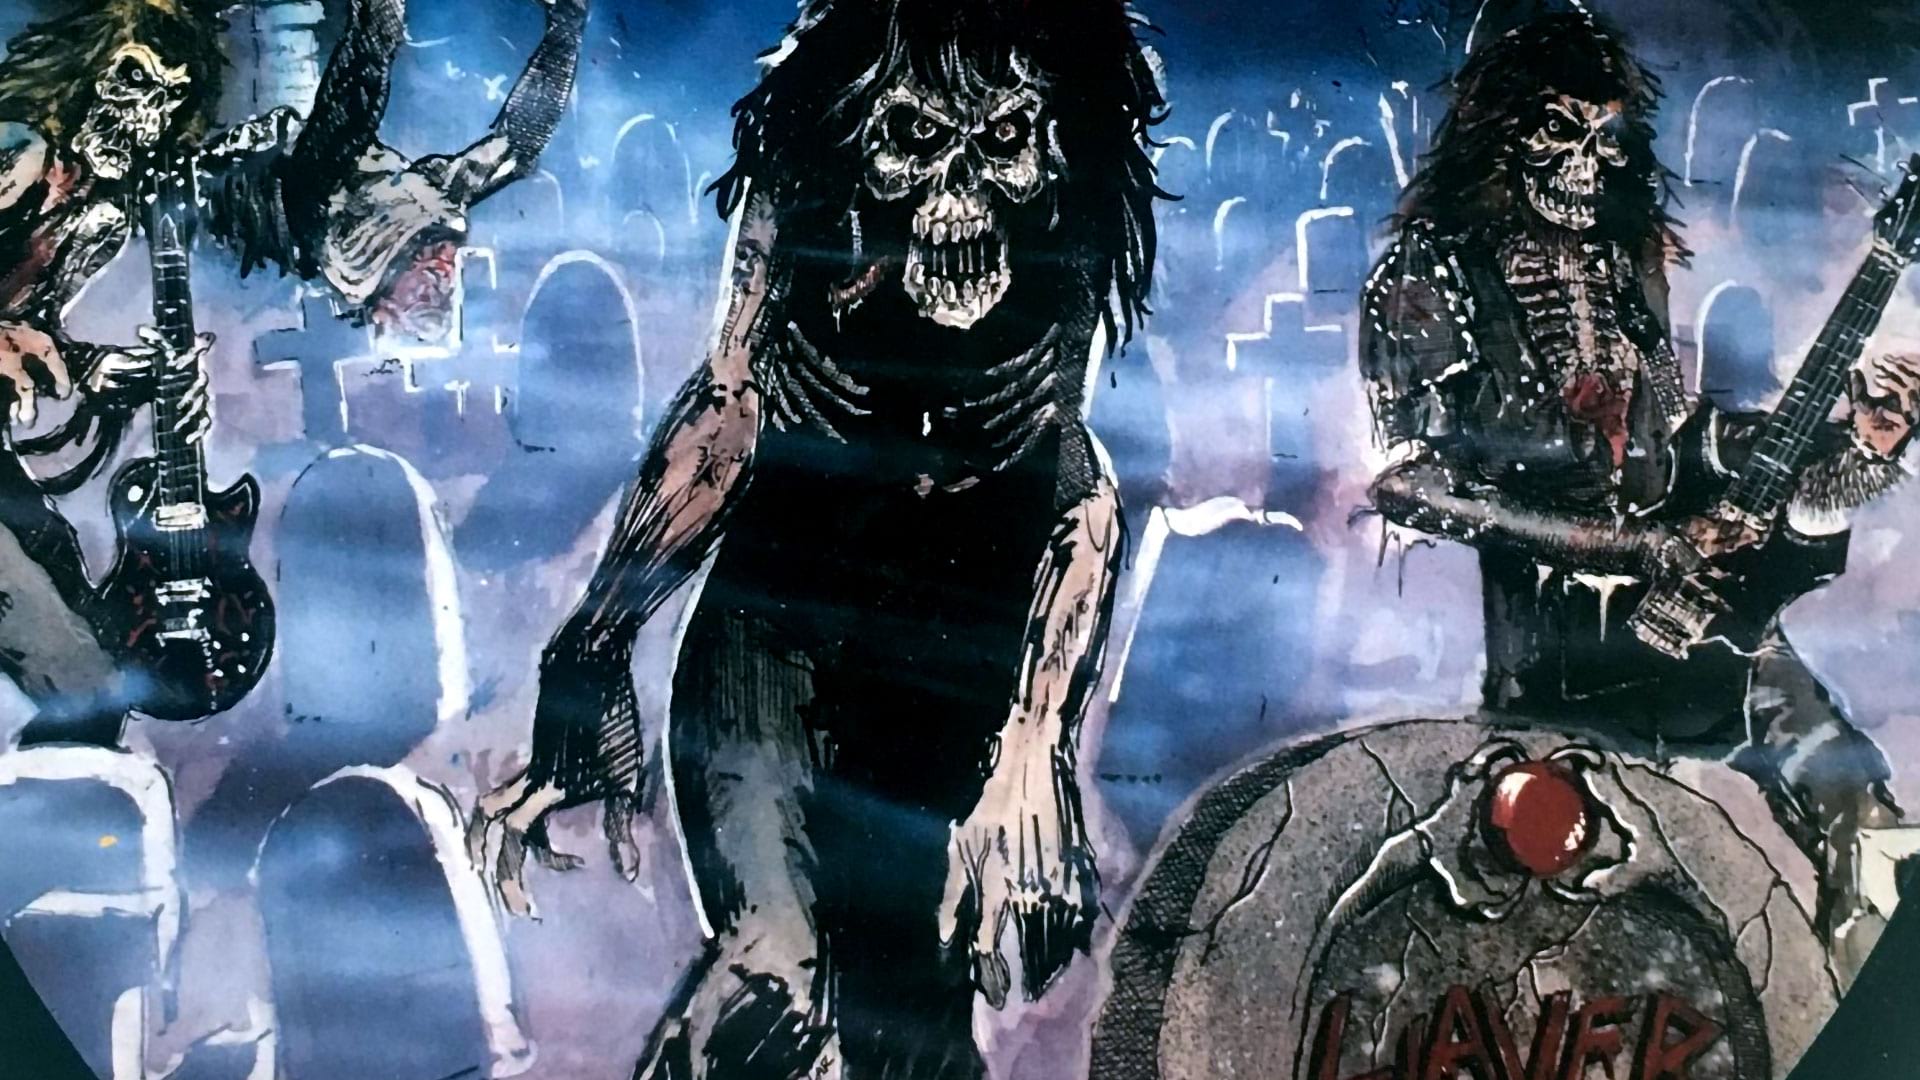 35 Years Ago: SLAYER release Live Undead